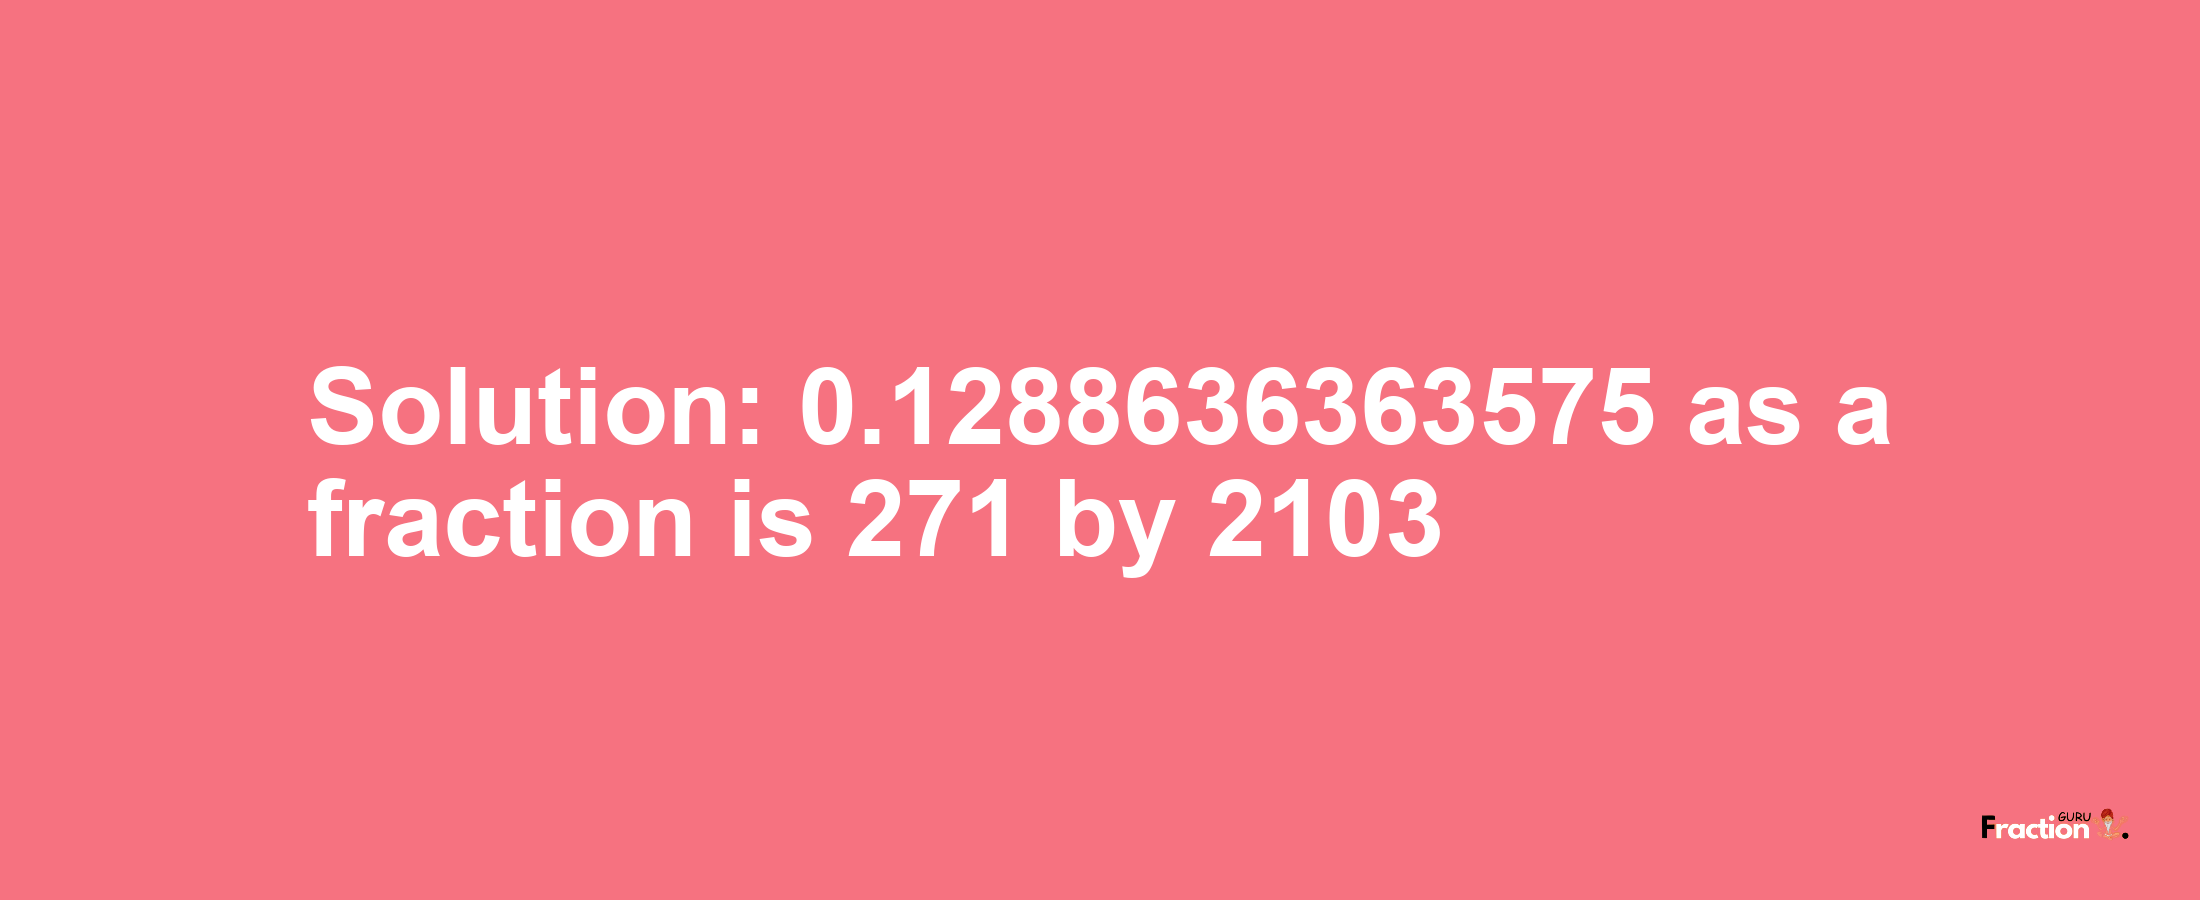 Solution:0.1288636363575 as a fraction is 271/2103